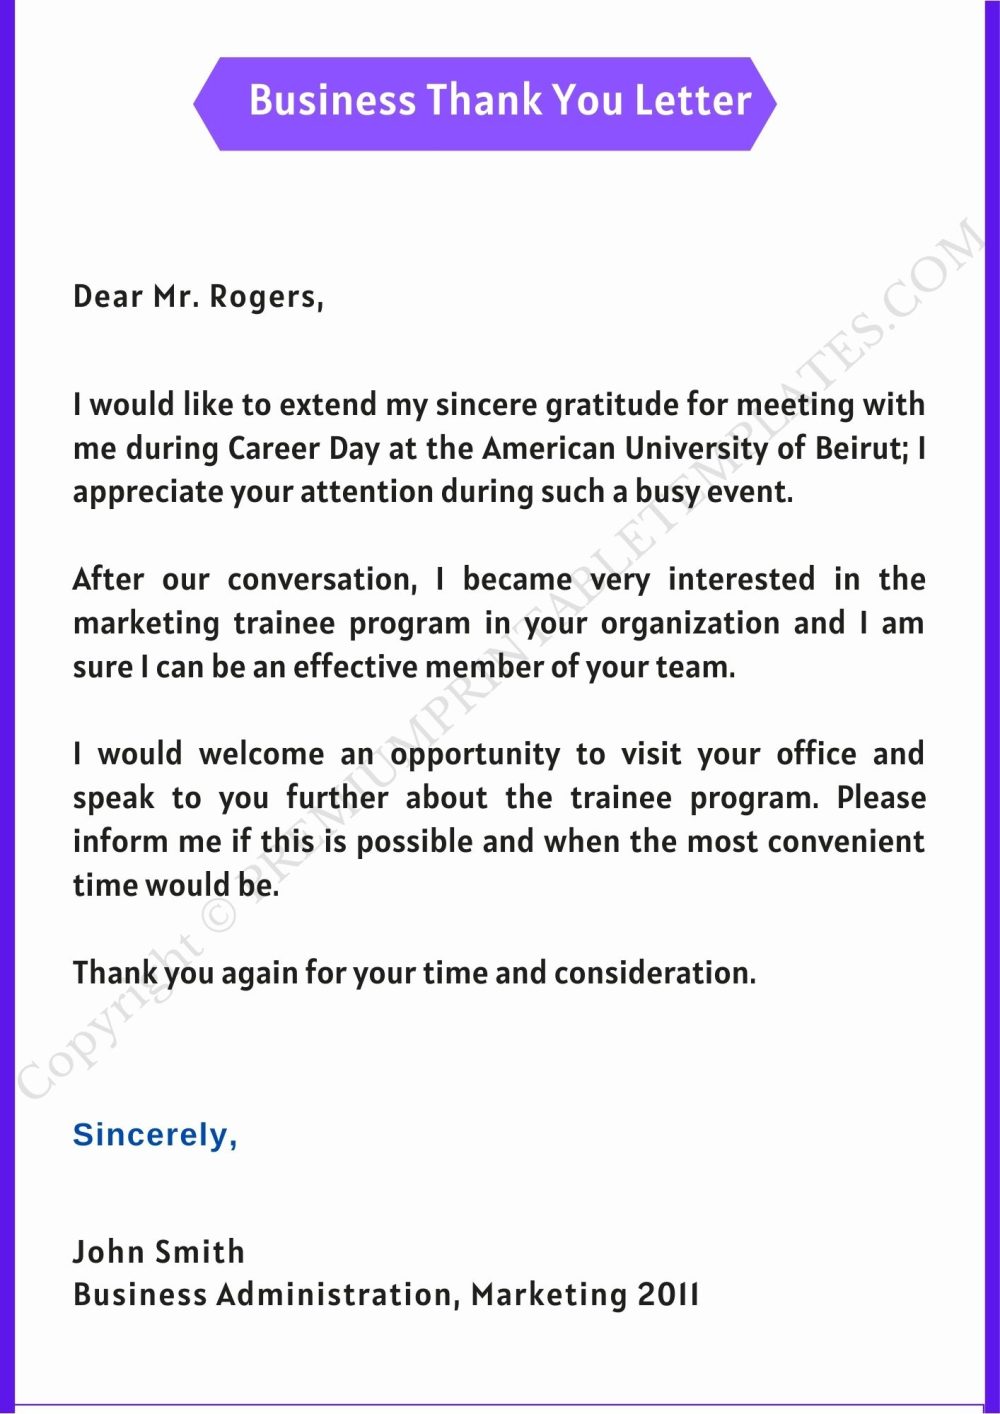 Business Thank You Letter Download